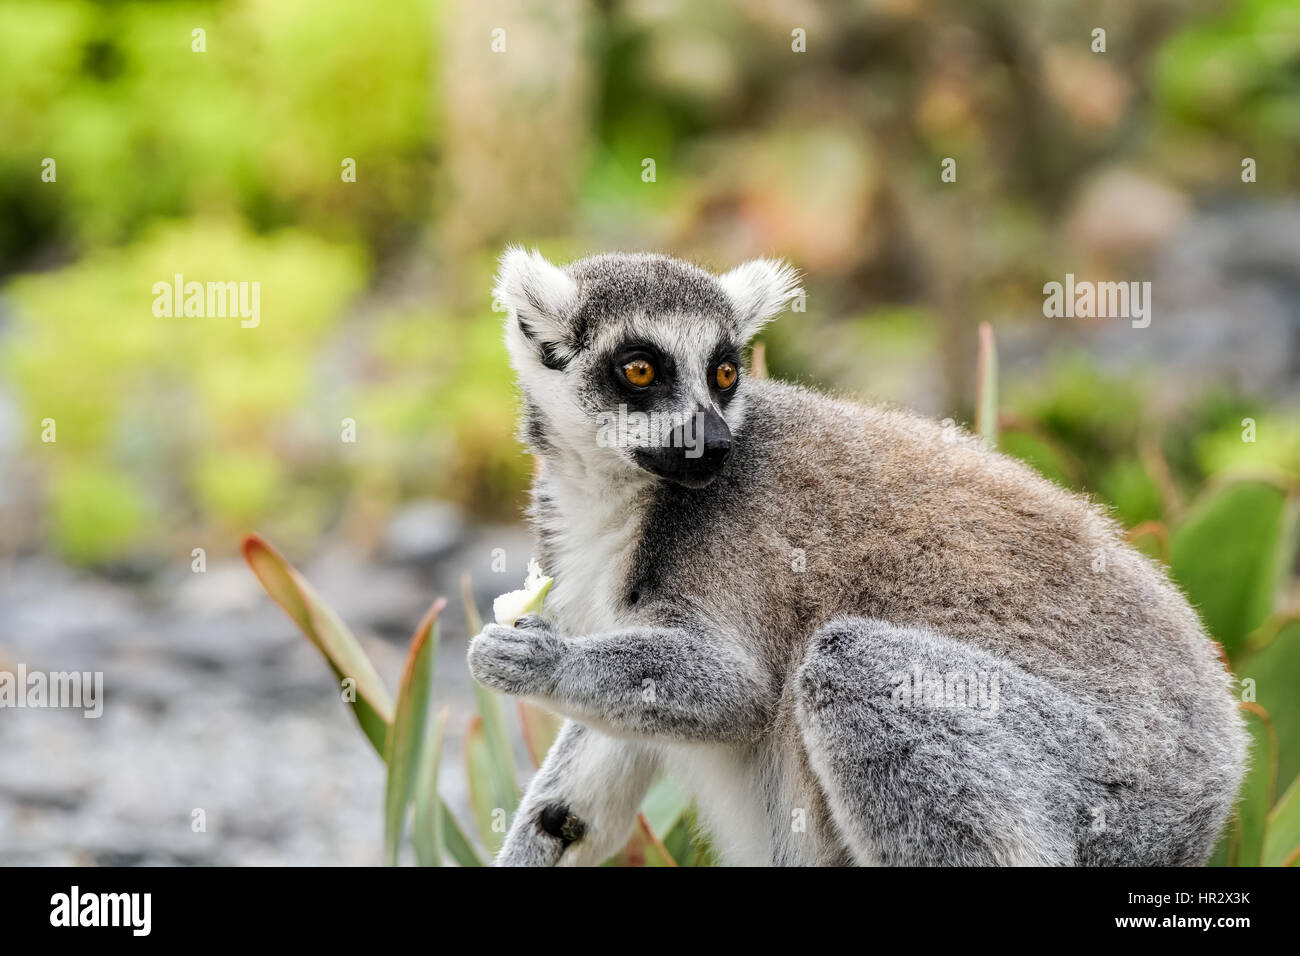 An alert lemur looks to it's left while holding food in it's hand, with wide open eyes. Stock Photo